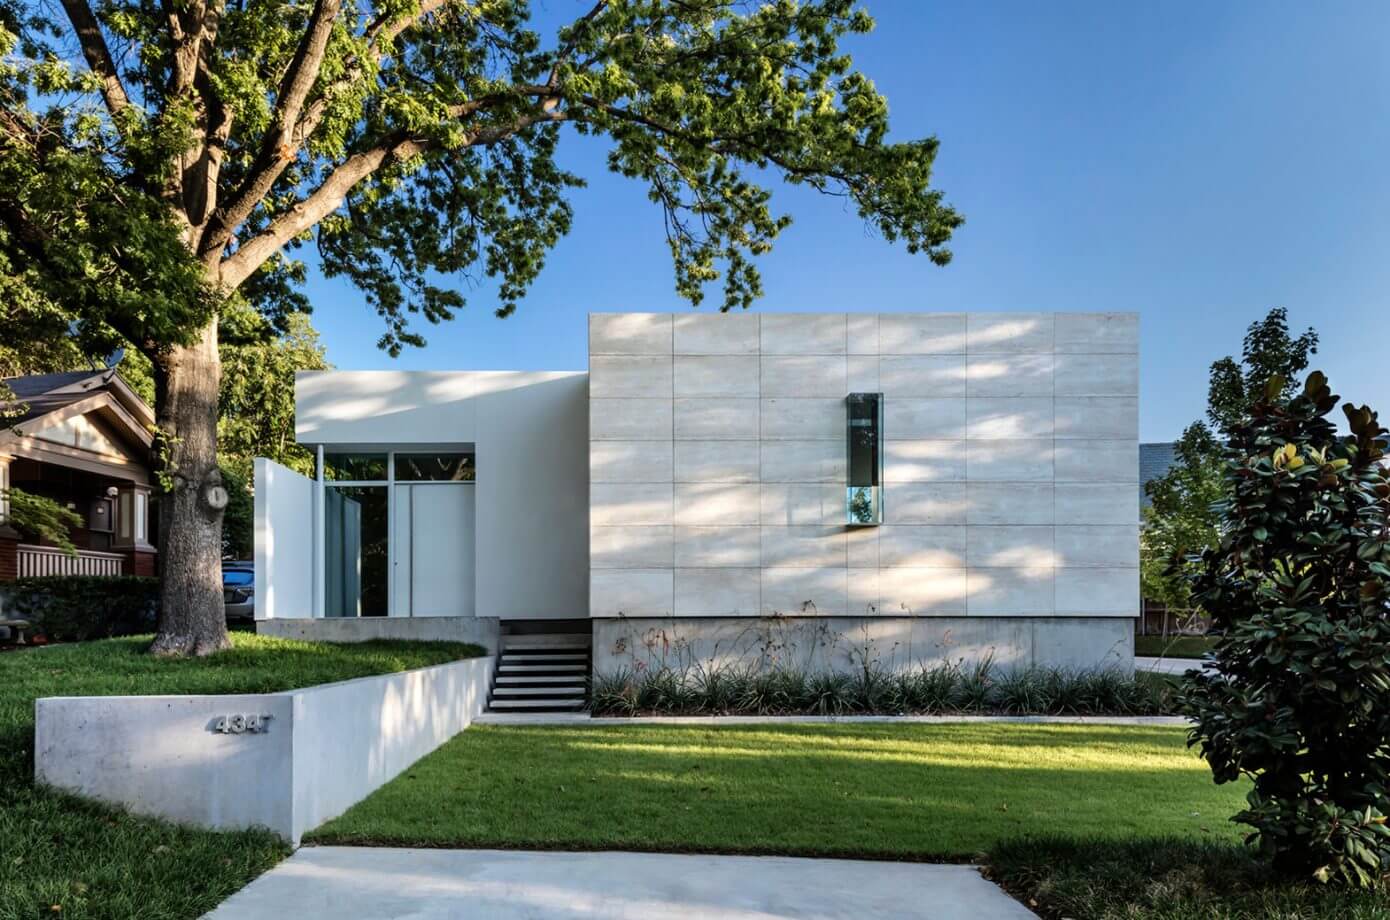 Home in Dallas by Morrison Dilworth + Walls